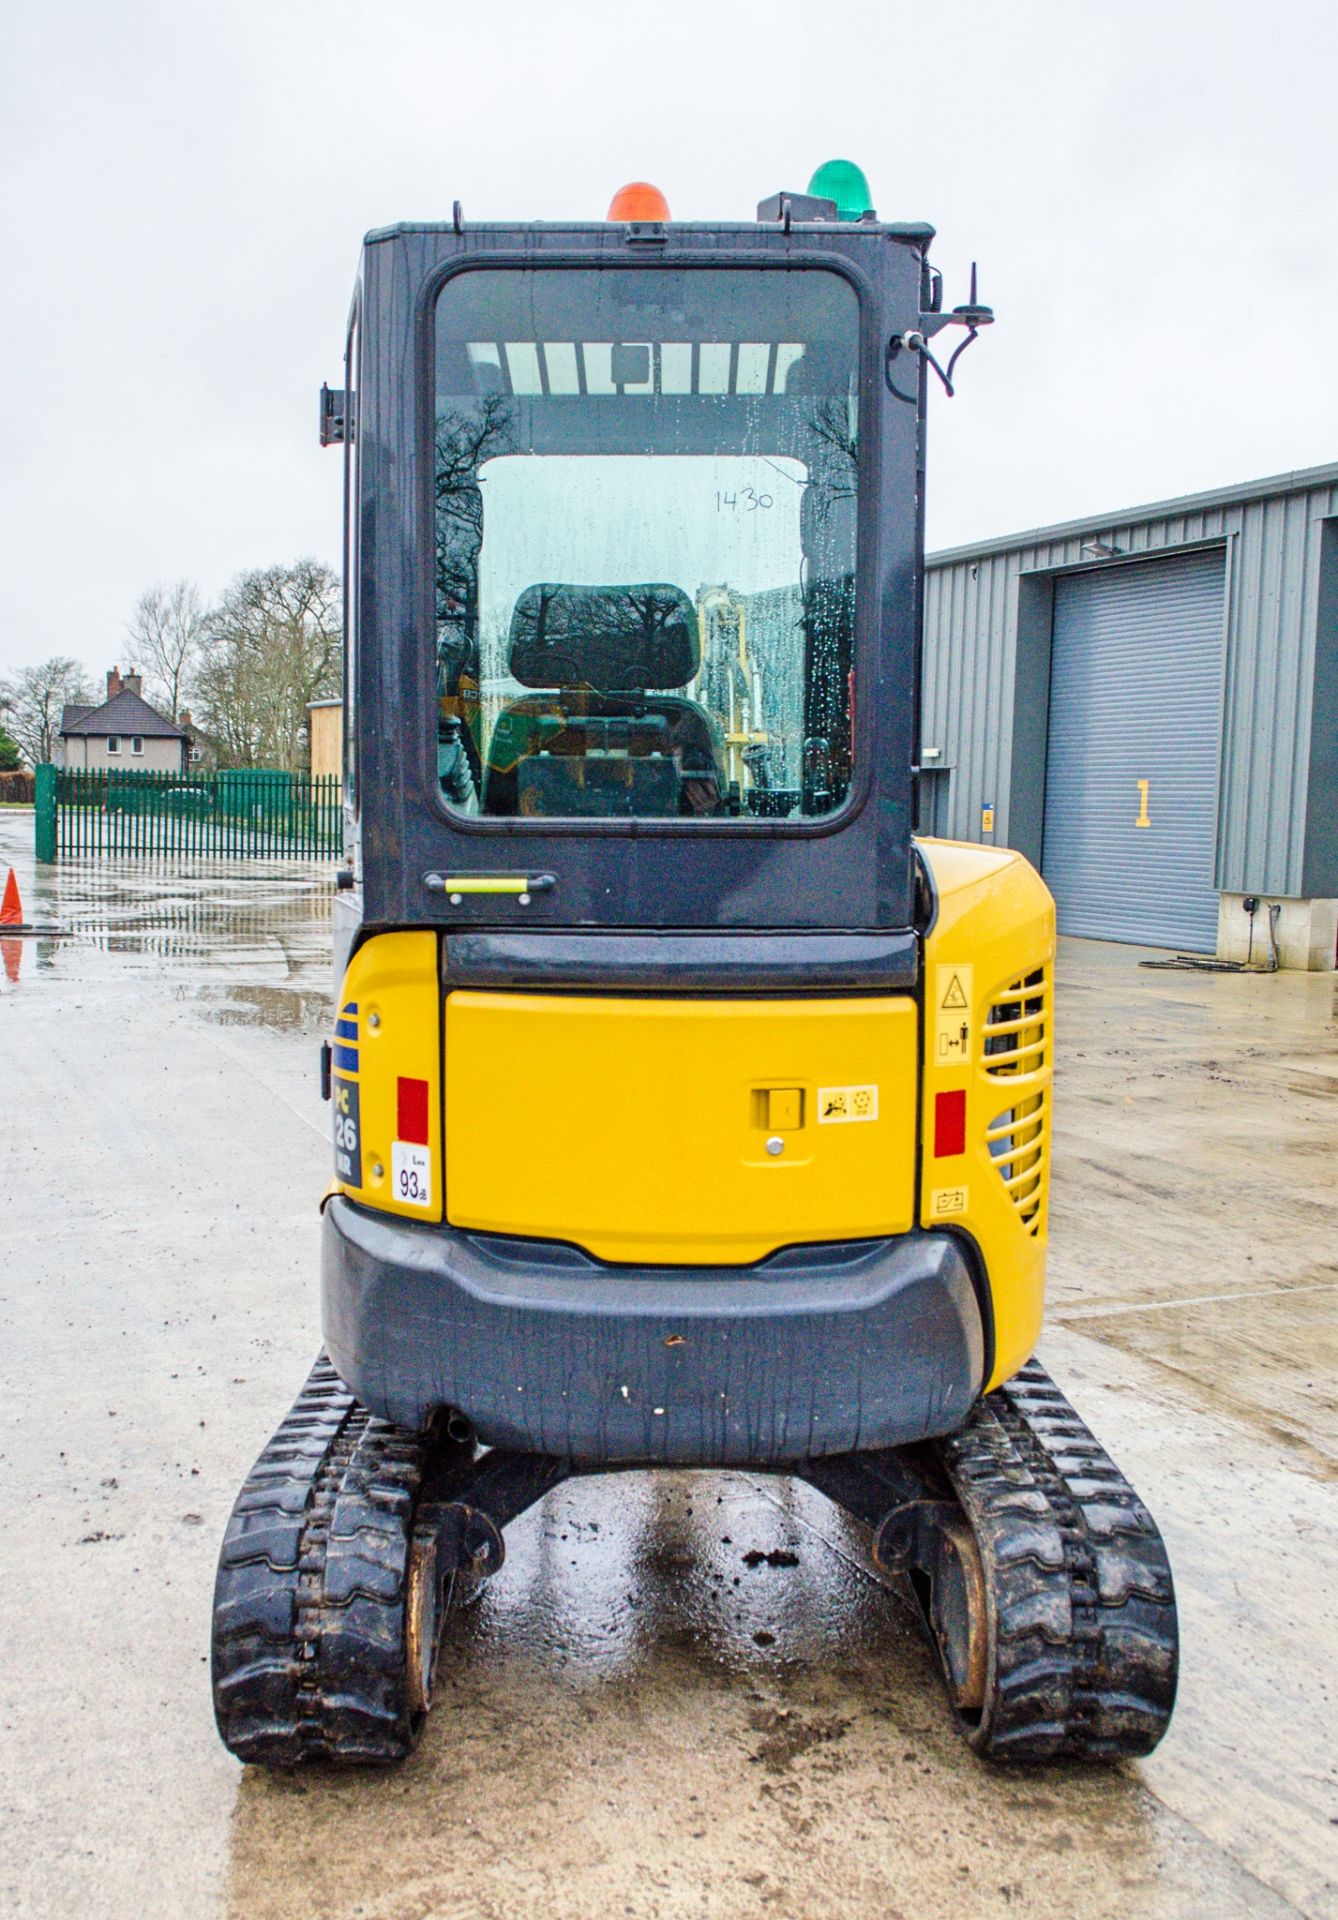 Komatsu PC26MR-3 2.6 tonne rubber tracked mini excavator Year: 2019 S/N: 33785 Recorded Hours: - Image 6 of 22